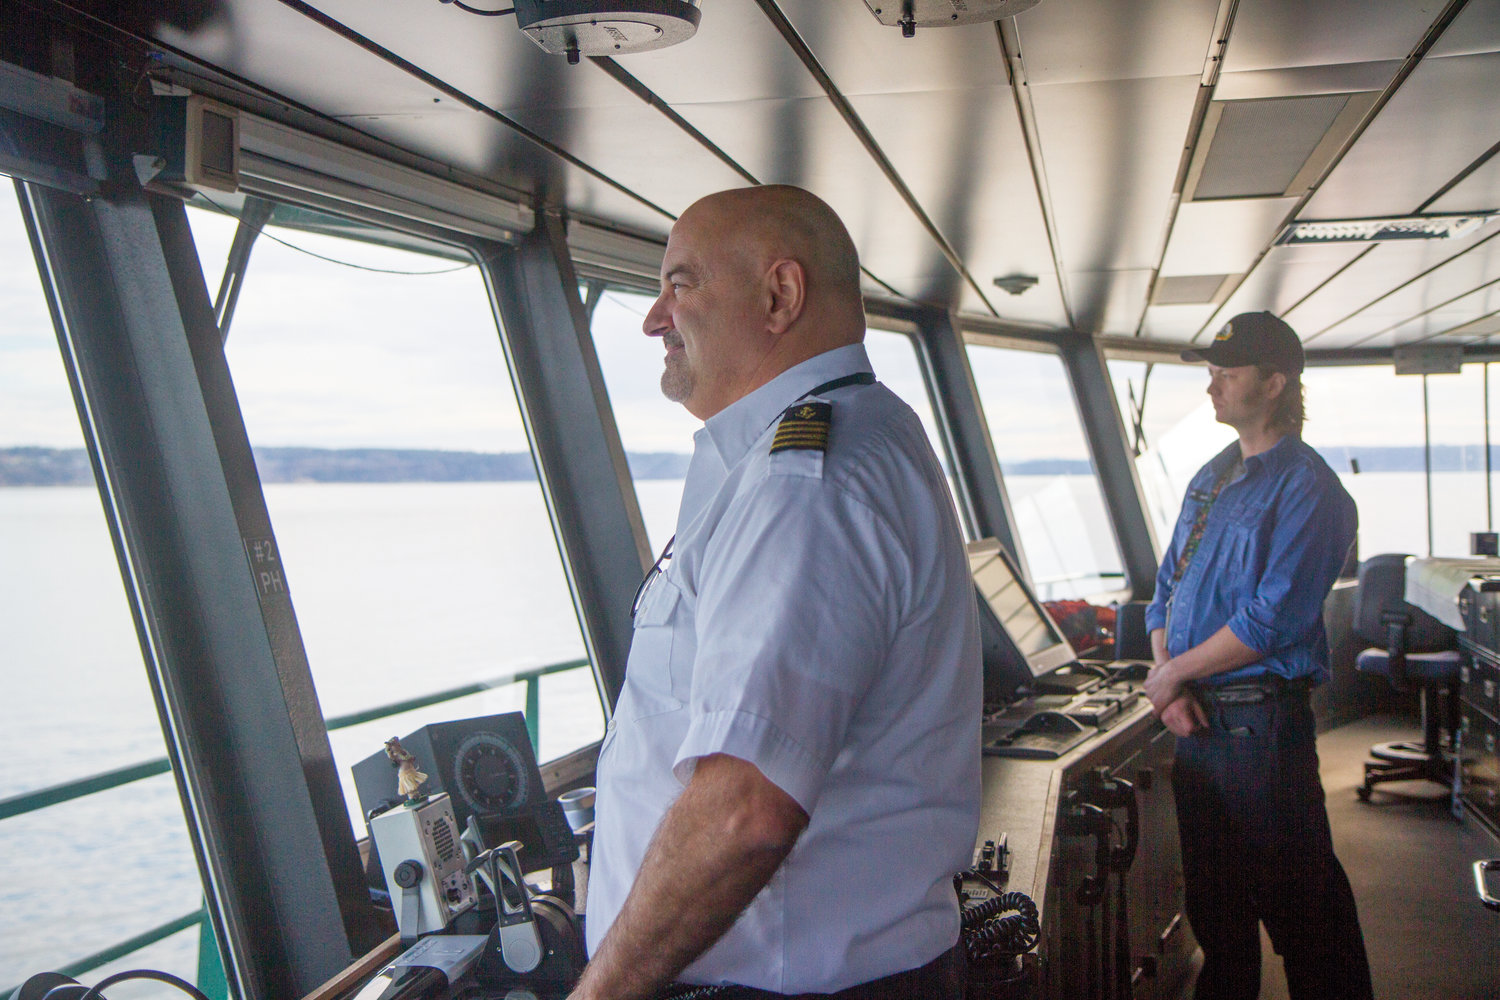 Capt. Dennis Hausdorf looks out on the Salish Sea while taking the ferry from Port Townsend to Coupeville.